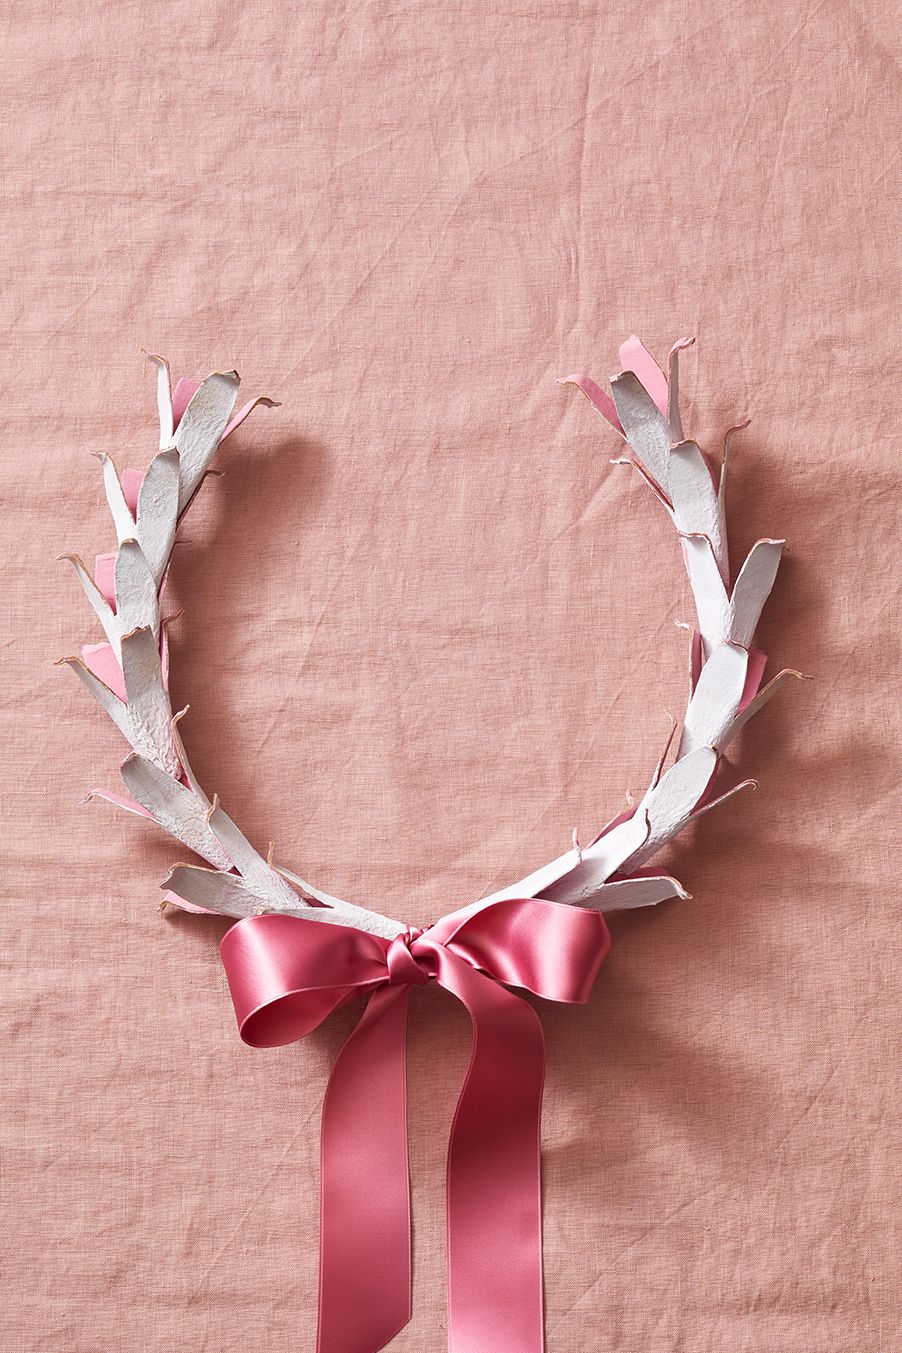 a wreath with a pink bow